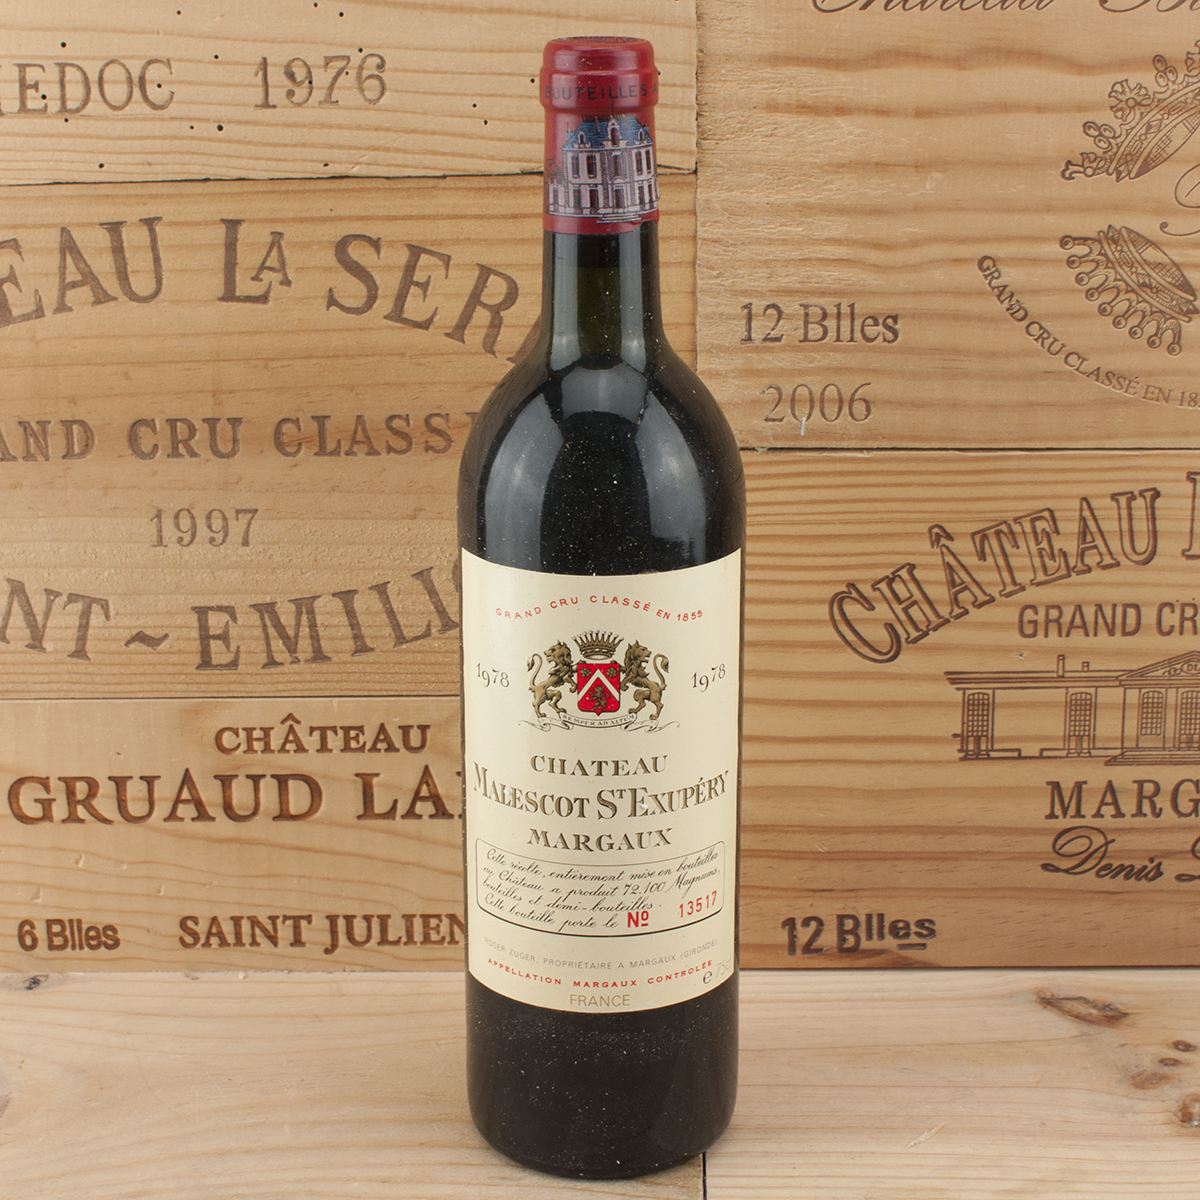 1978 Chateau Malescot St. Exupery